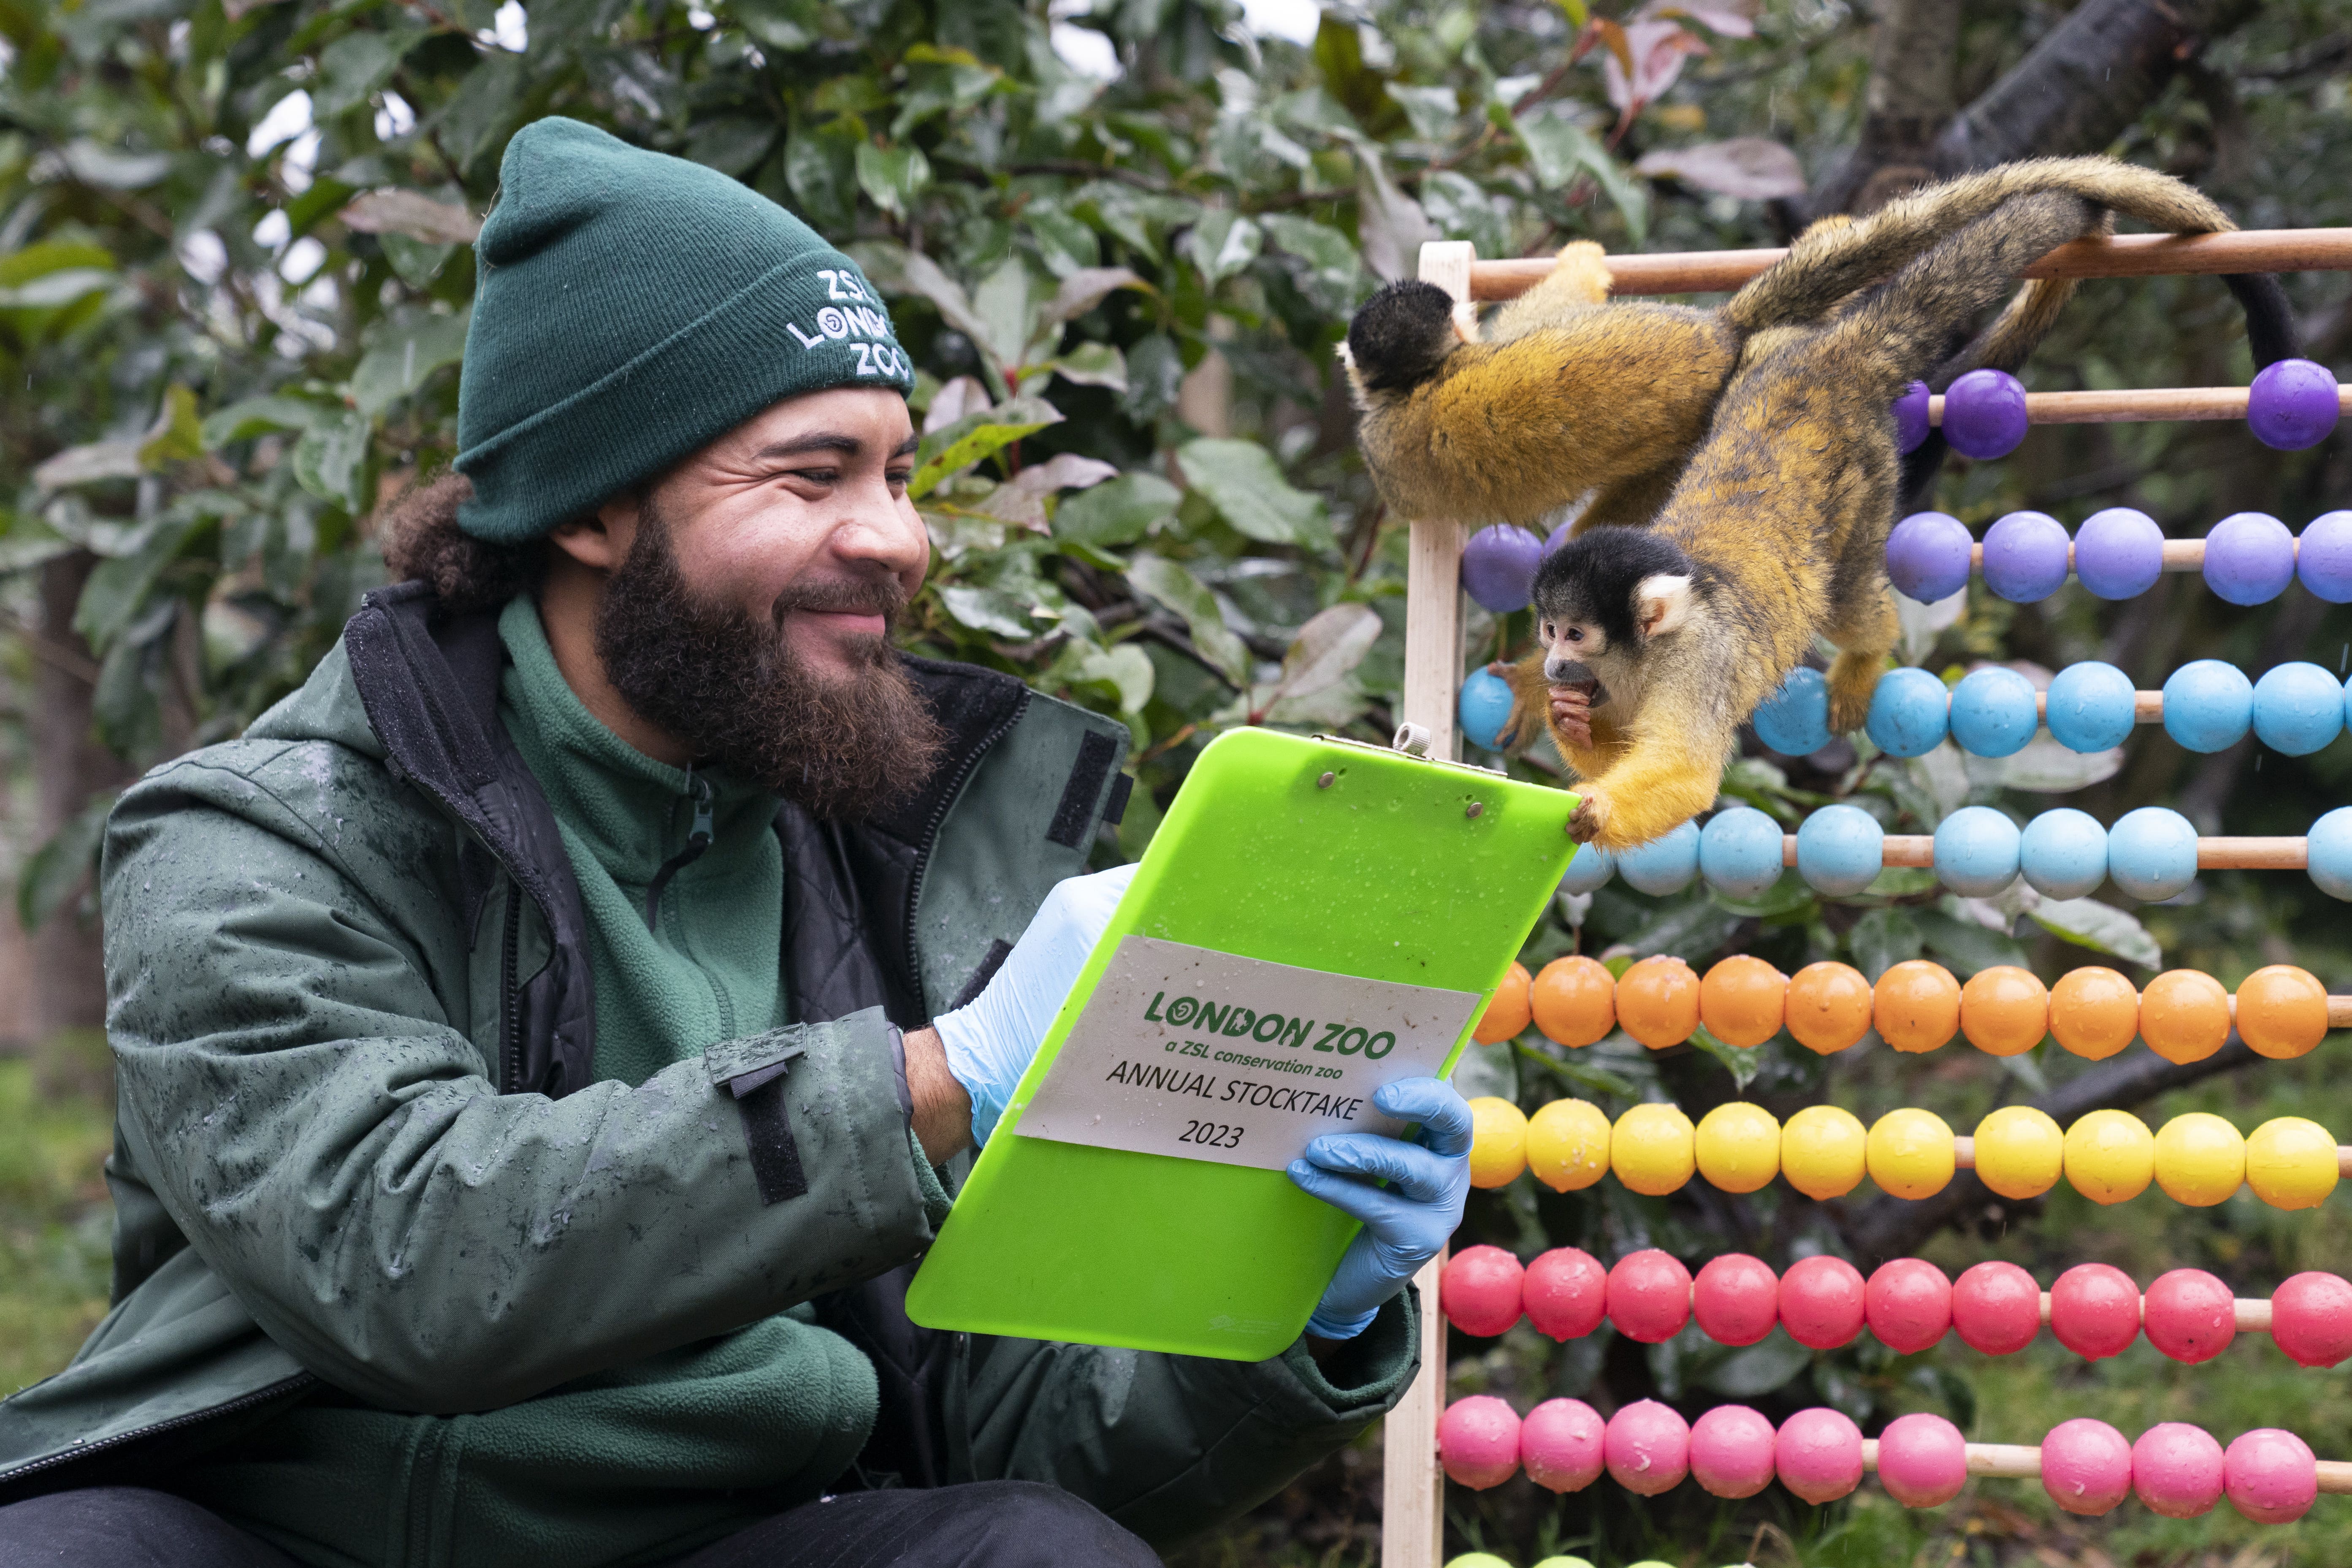 Squirrel monkeys are counted during the annual stocktake at ZSL London Zoo (Kirsty O’Connor/PA)